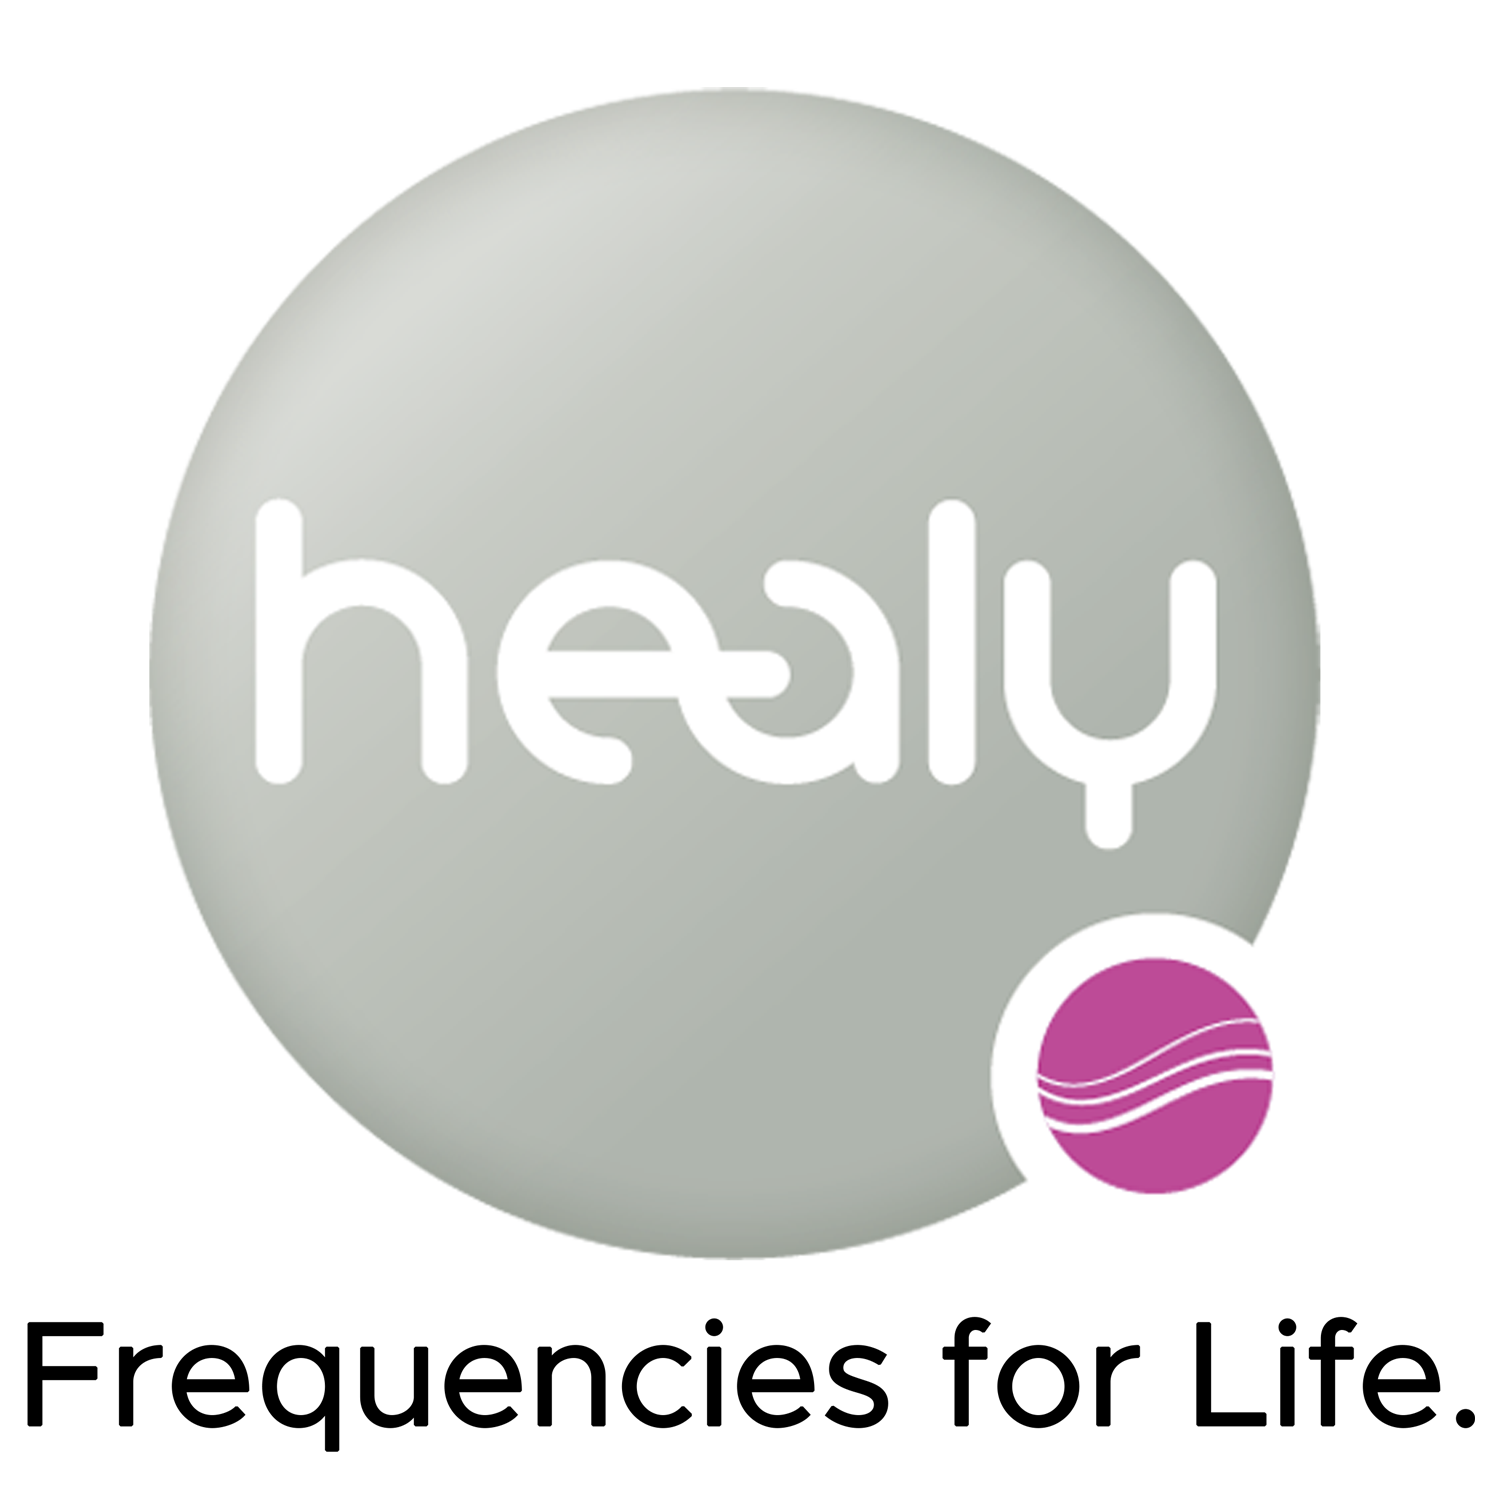 healy-logo-770184332.png